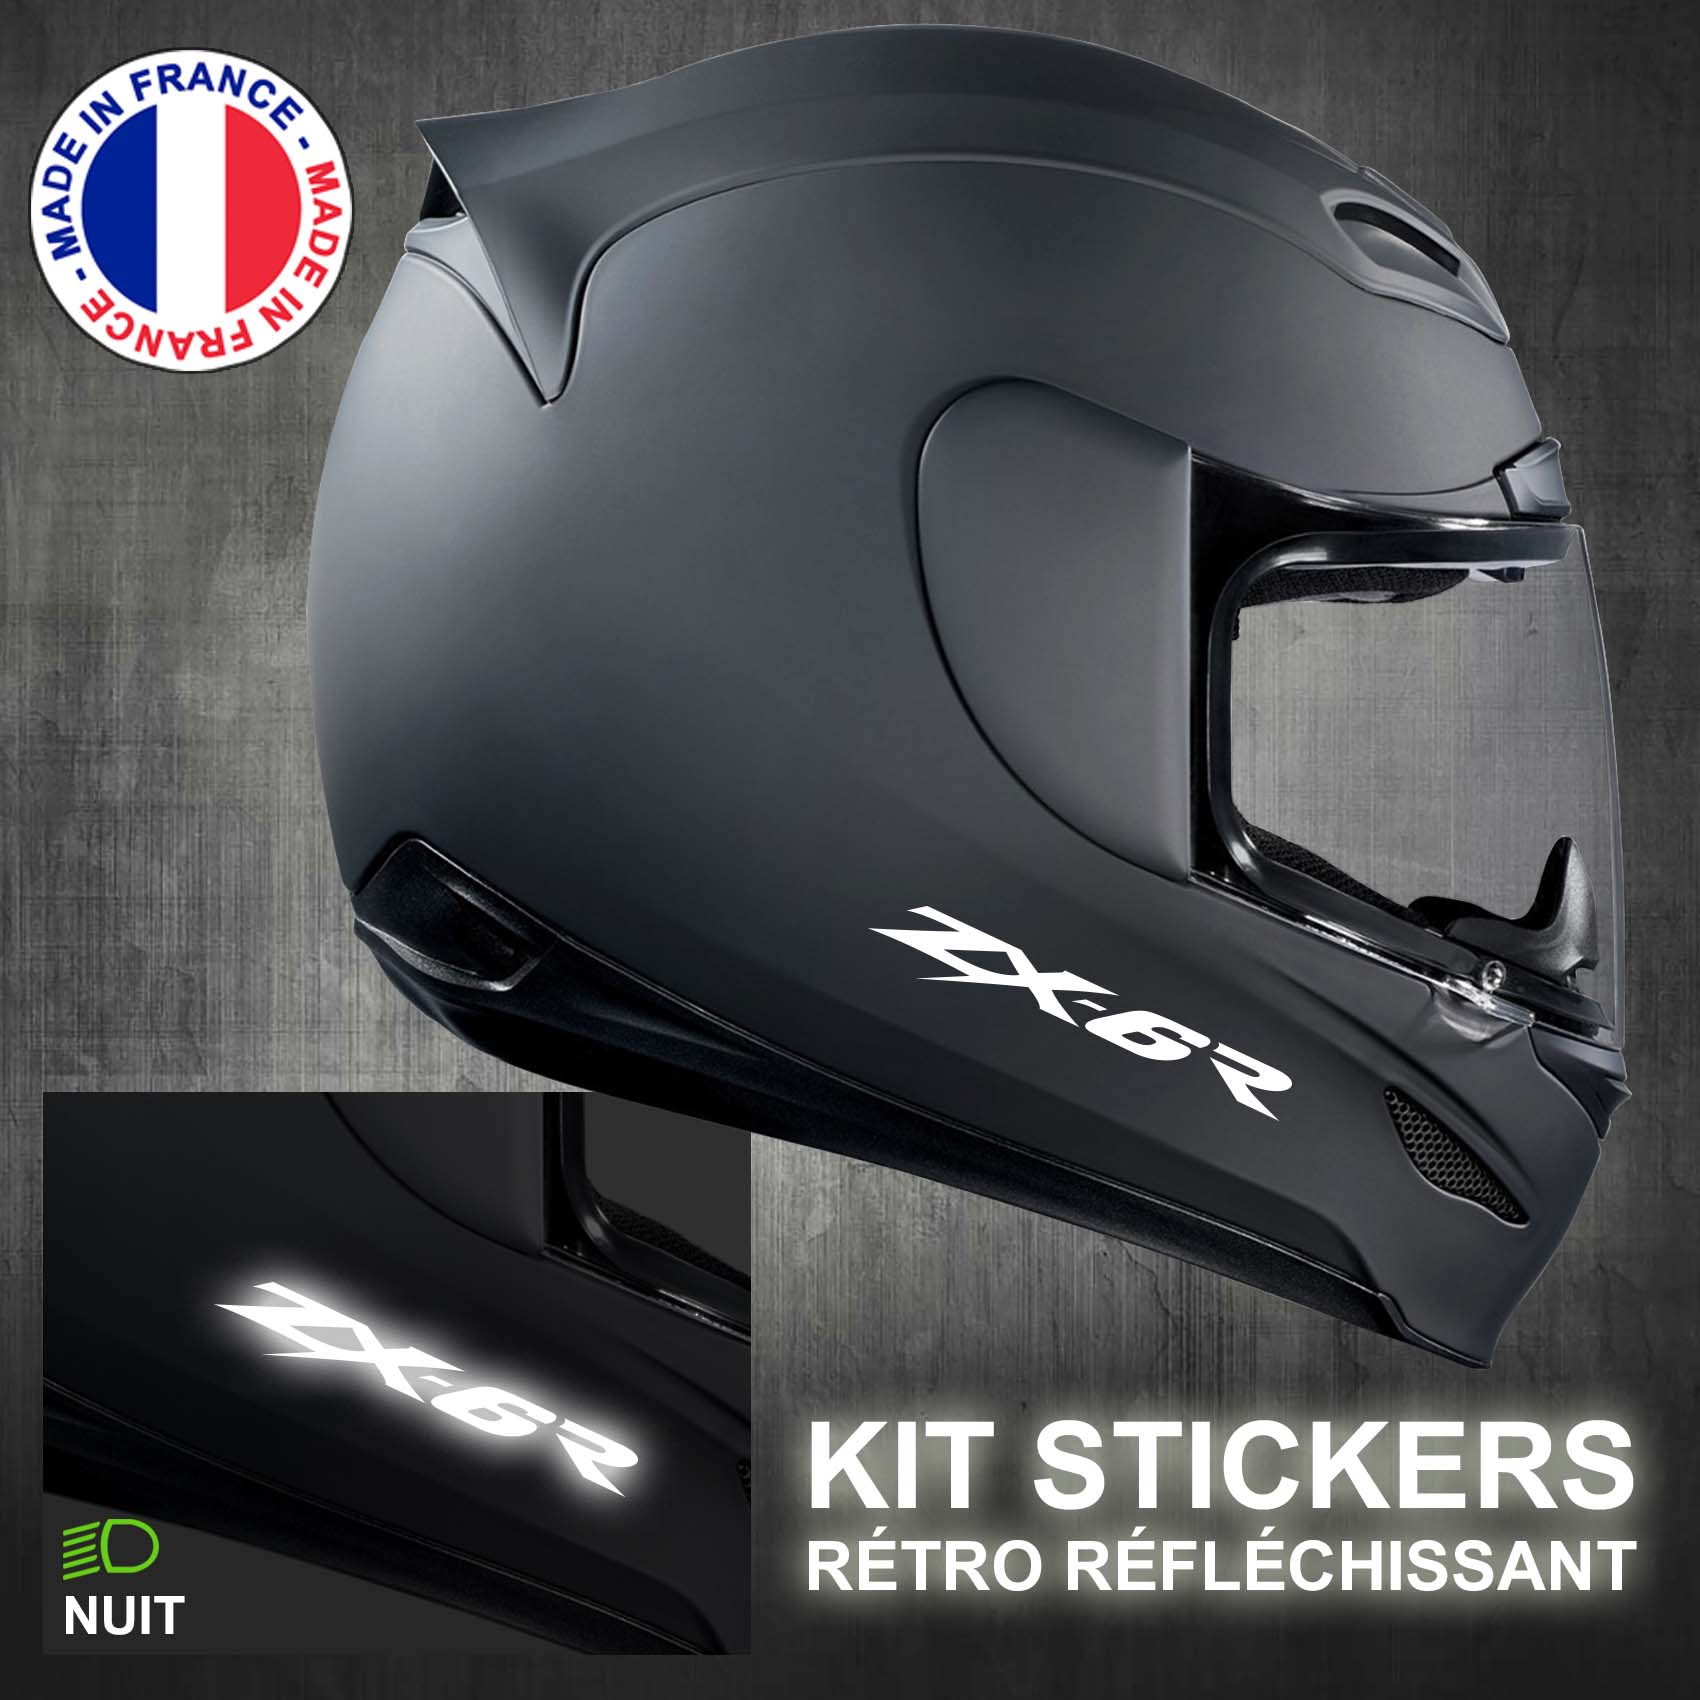 stickers-casque-moto-zx-6r-kawasaki-ref1-retro-reflechissant-autocollant-noir-moto-velo-tuning-racing-route-sticker-casques-adhesif-scooter-nuit-securite-decals-personnalise-personnalisable-min